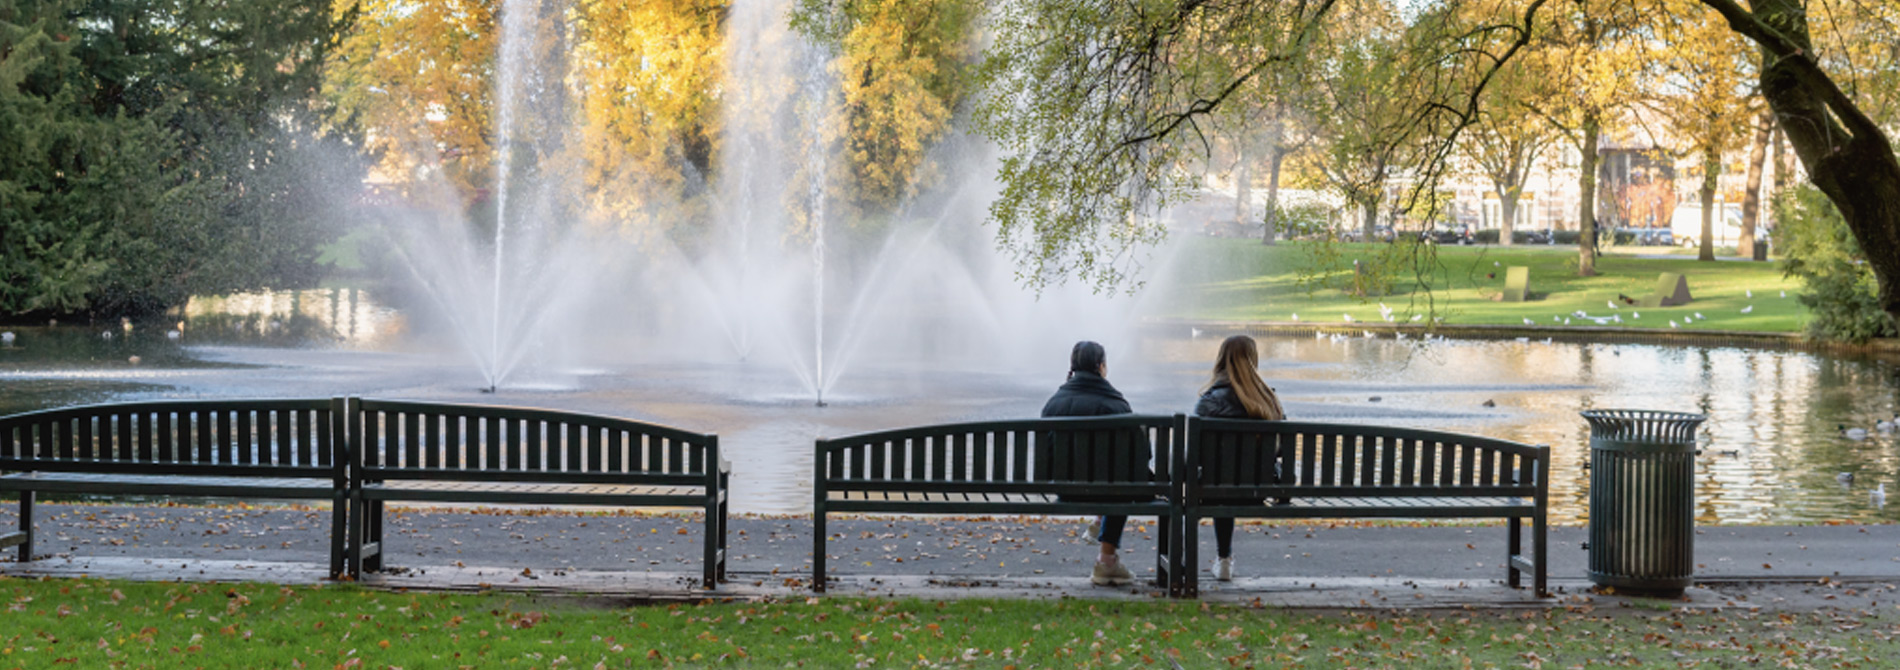 Two women sitting on park bench in front of fountains